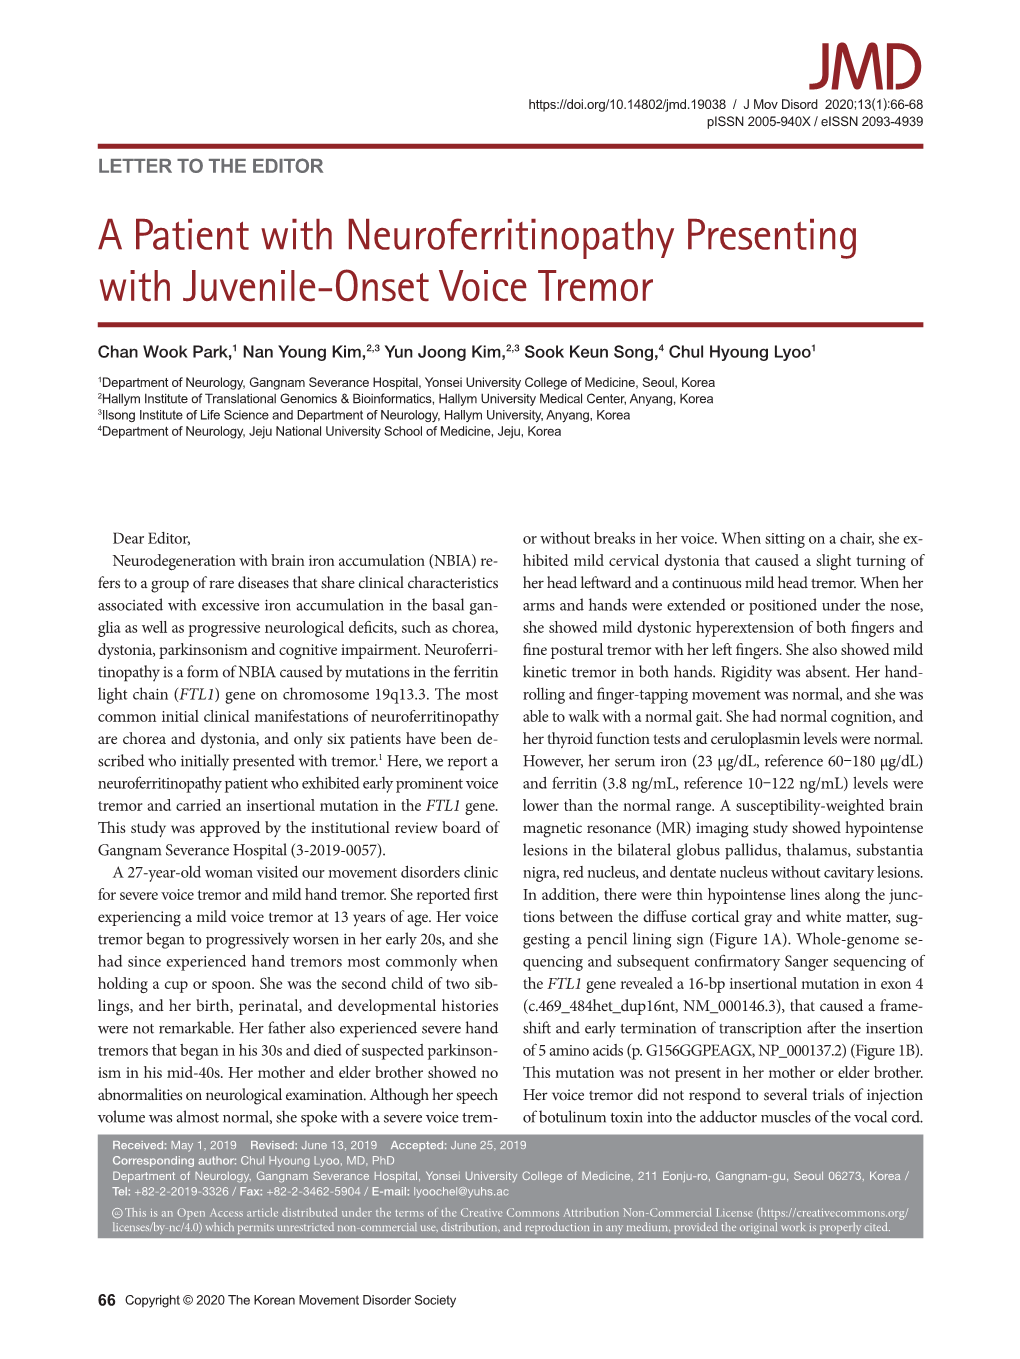 A Patient with Neuroferritinopathy Presenting with Juvenile-Onset Voice Tremor